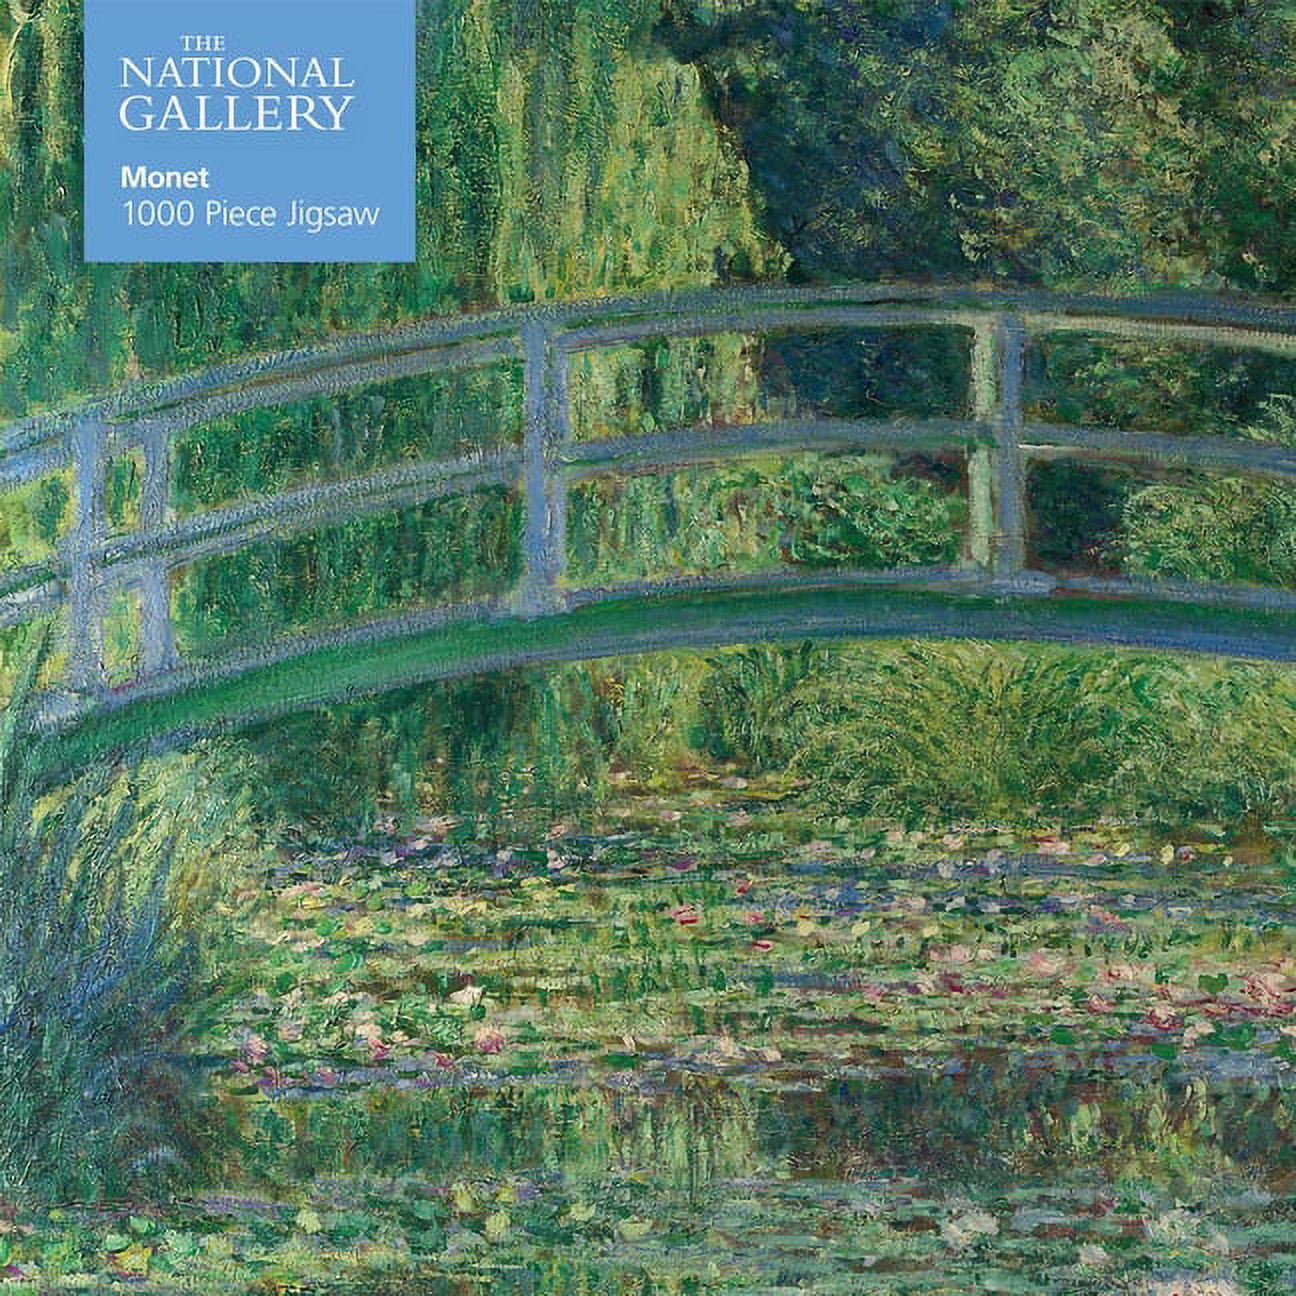 1000-piece Jigsaw Puzzles: Adult Jigsaw Puzzle National Gallery: Monet: The Water-Lily Pond : 1000-Piece Jigsaw Puzzles (Jigsaw) - image 1 of 4